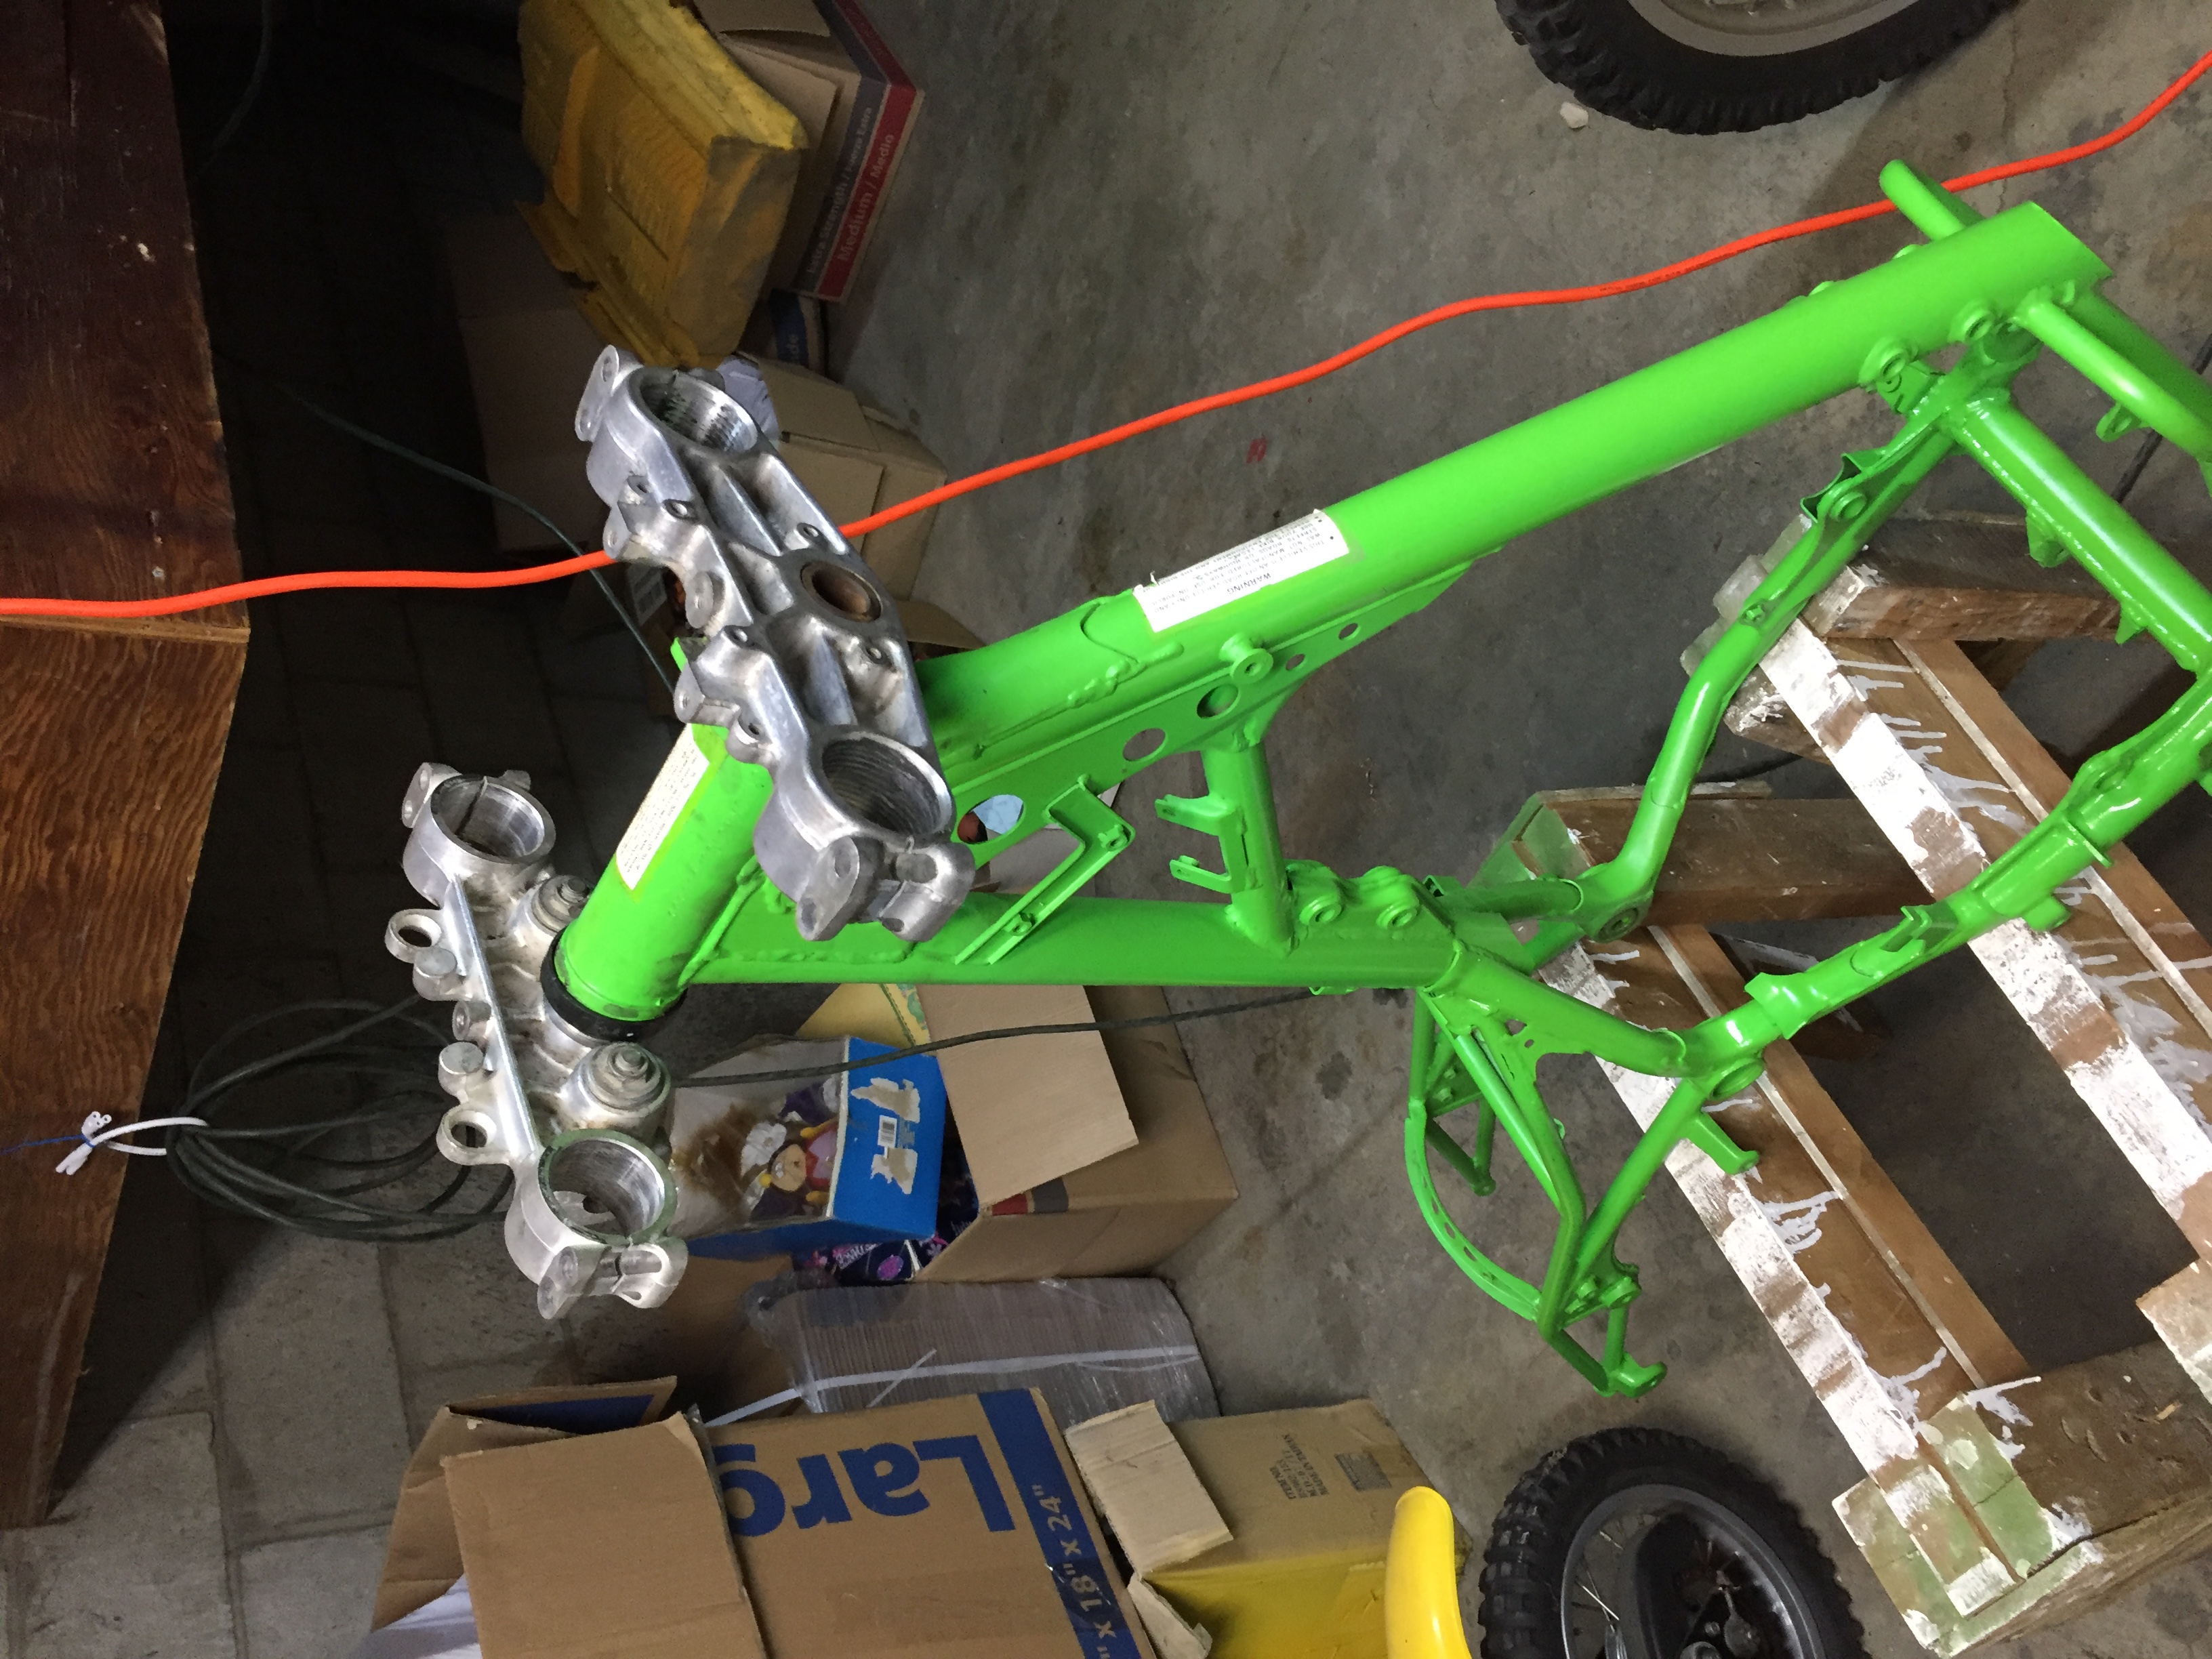 Original attempt at painting the frame with Engine Enamel Green